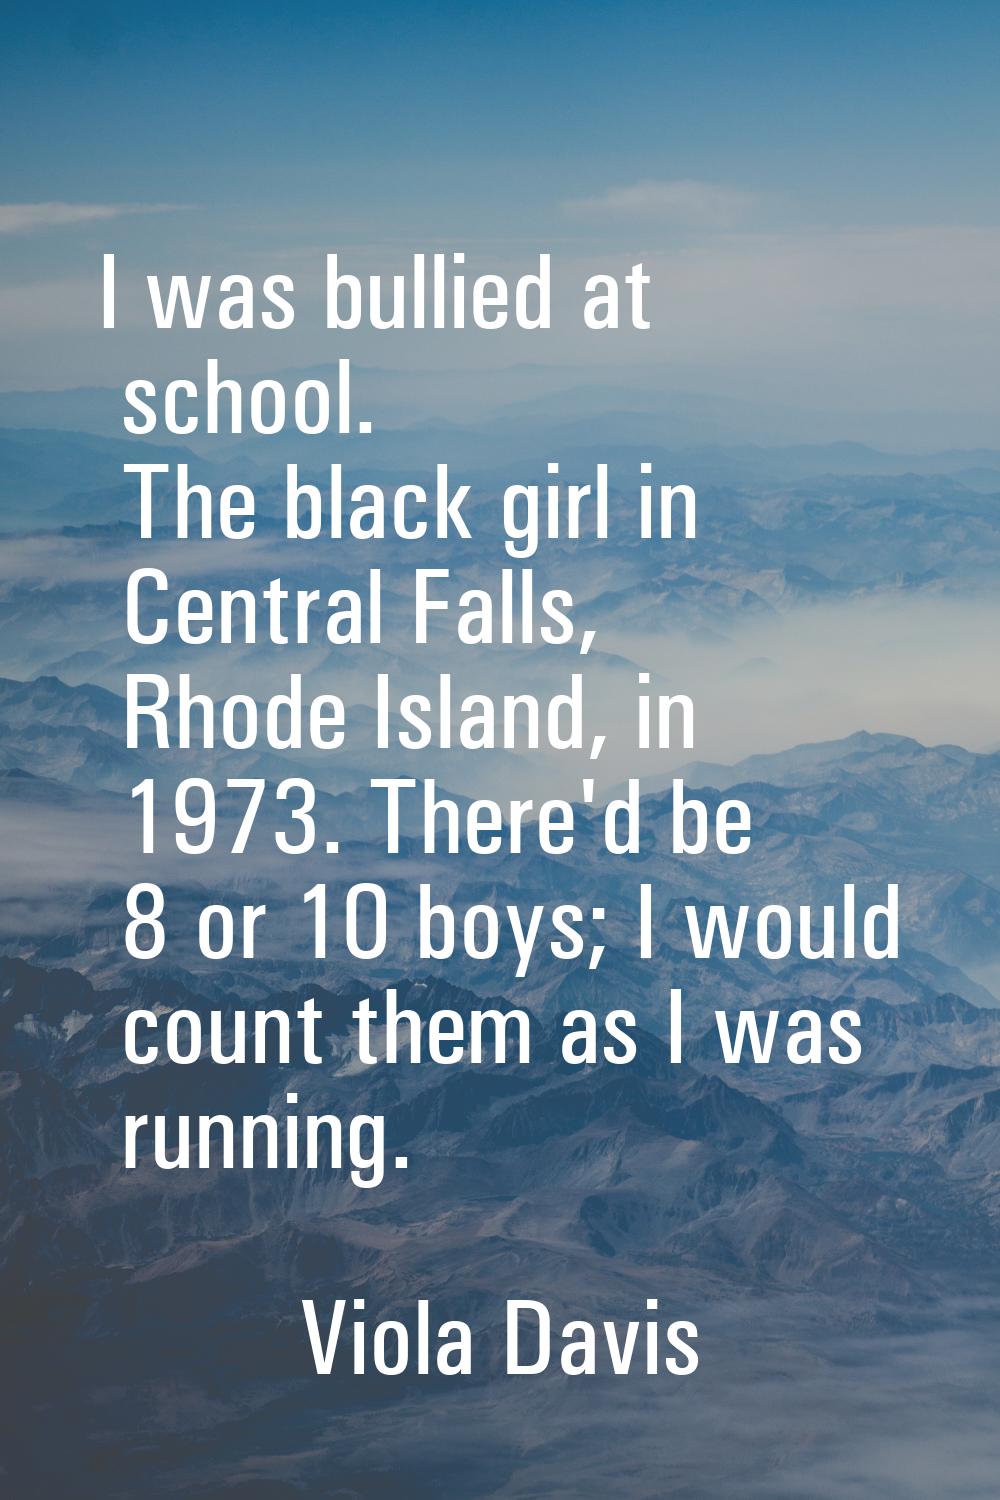 I was bullied at school. The black girl in Central Falls, Rhode Island, in 1973. There'd be 8 or 10